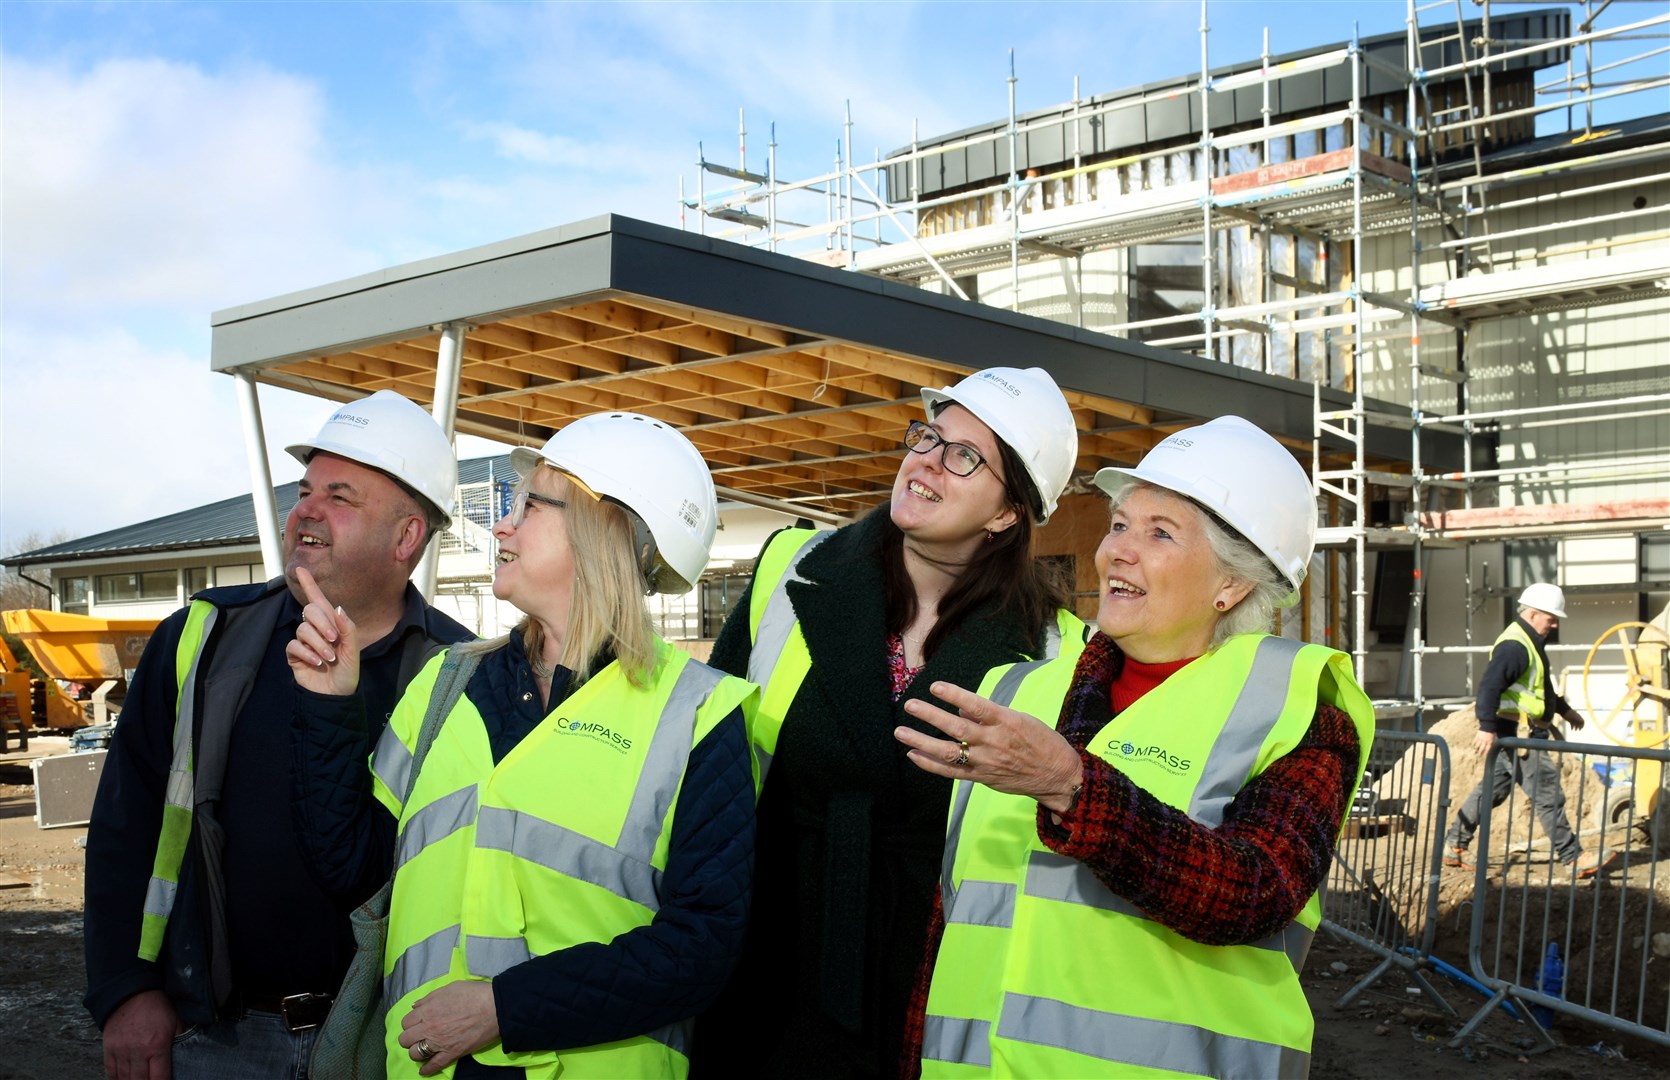 Site manager Greg Cooper, community fundraiser Rona Matheson, Emma Roddick, Scotland's former Equalities Minister, and Elsie Normington, view progress on the Haven Centre.